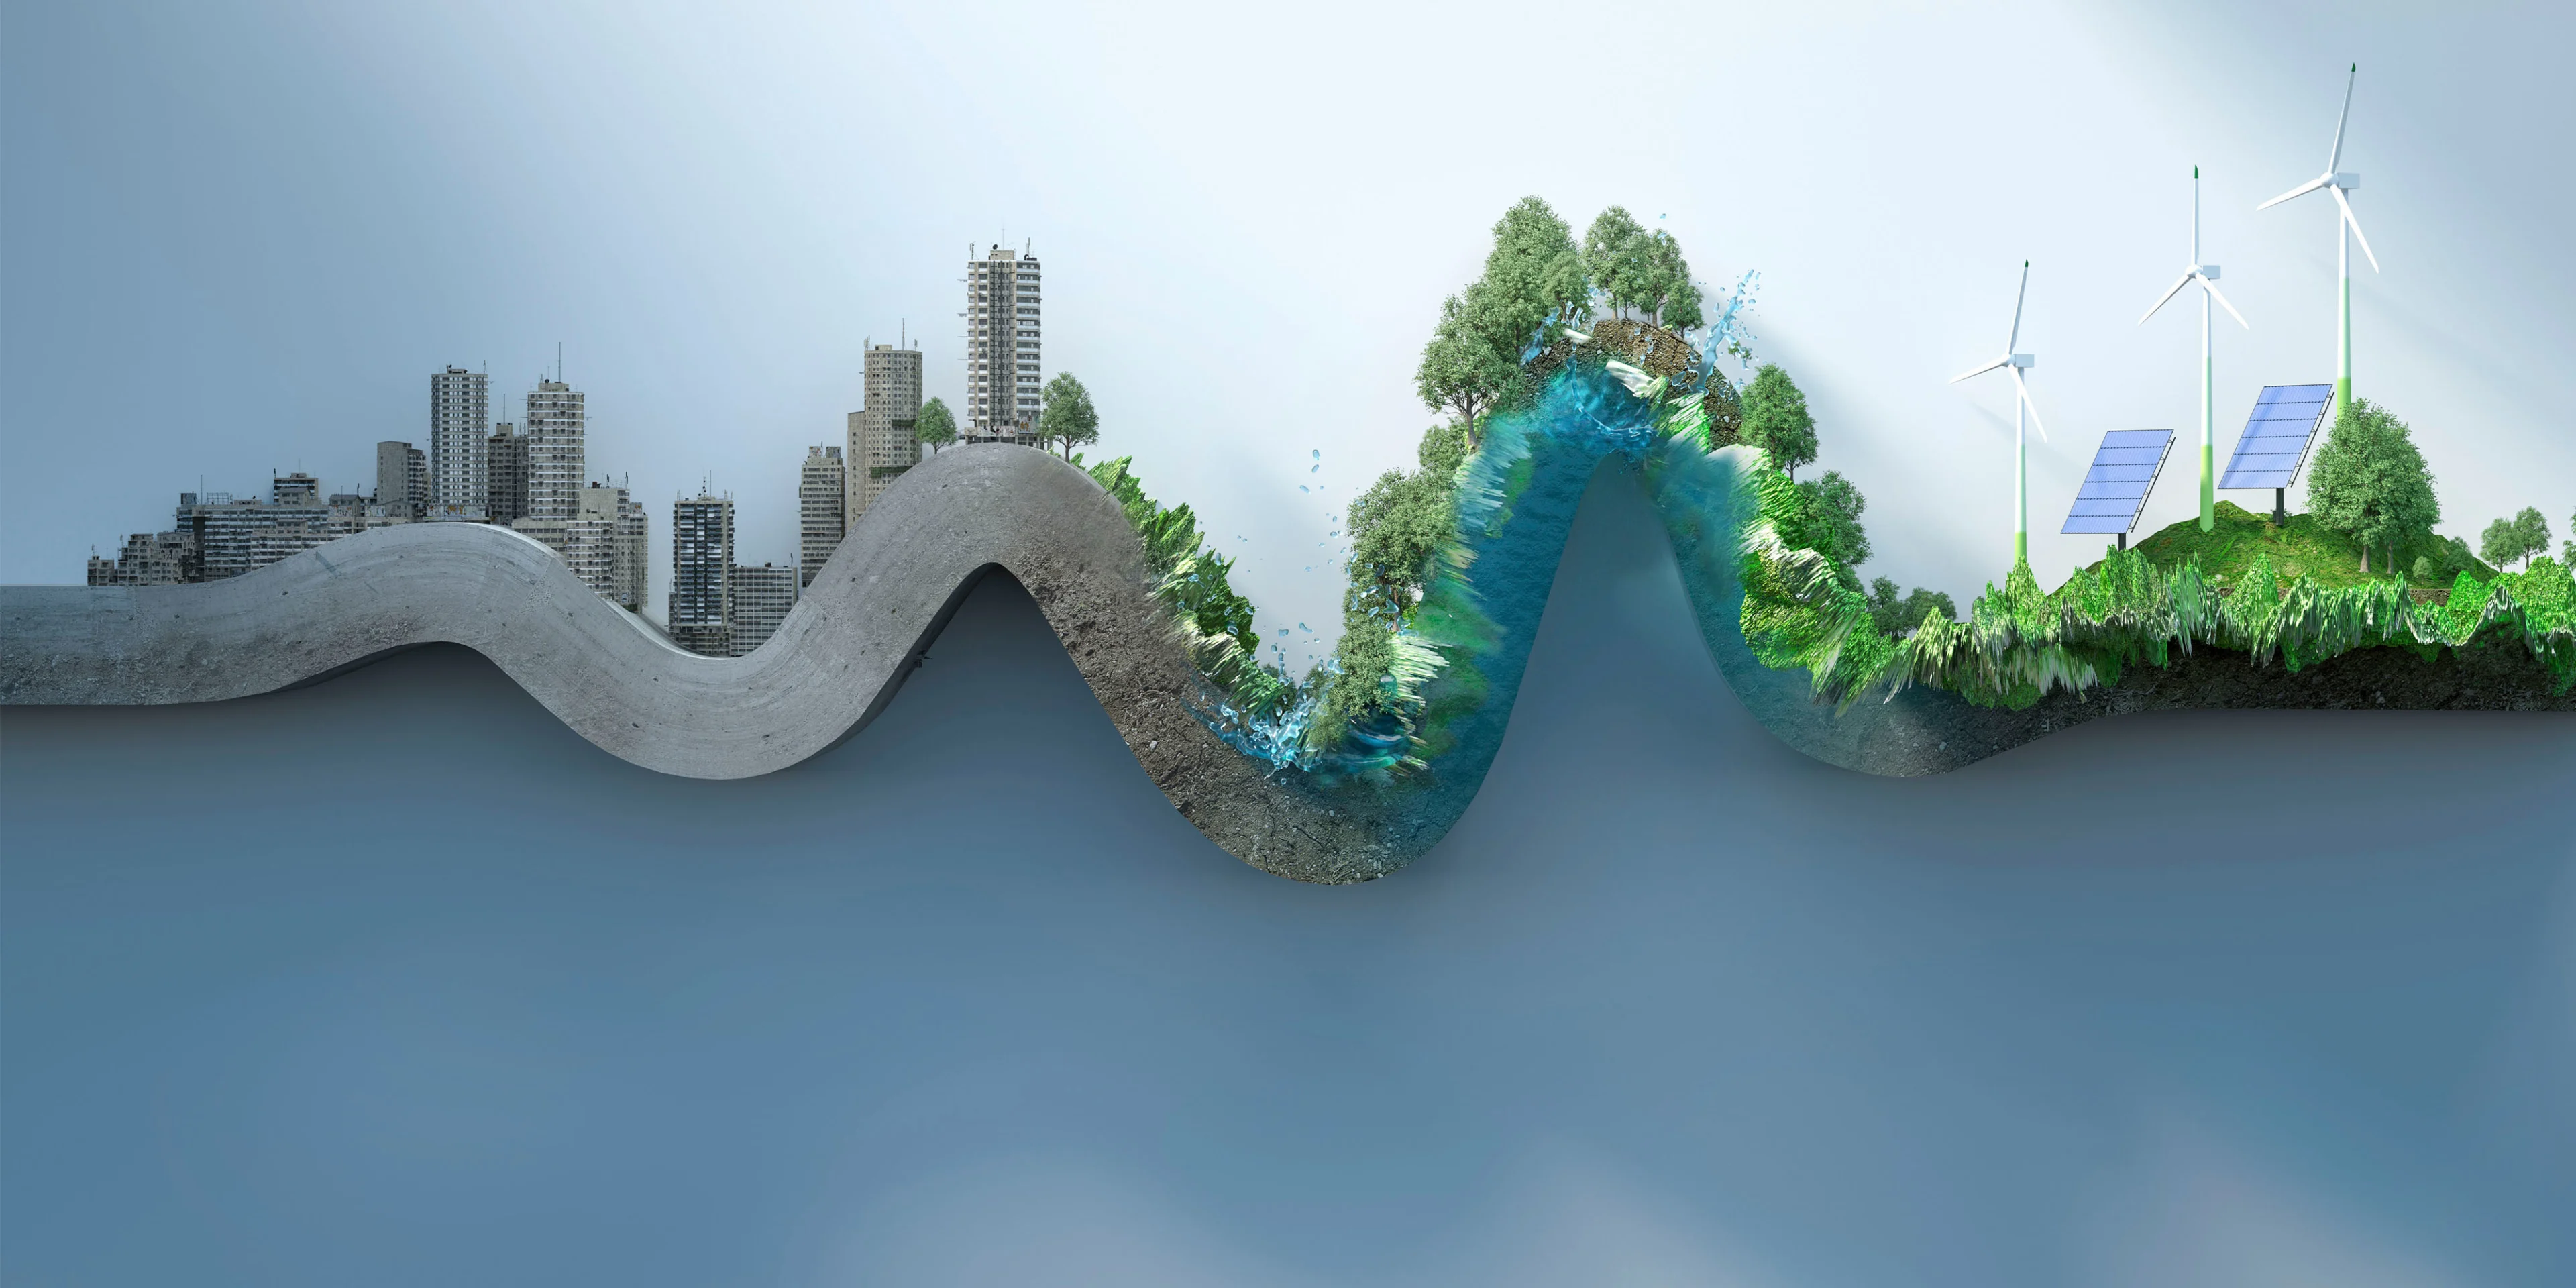 Abstract curve made of old grey city that develops into sustainable green city